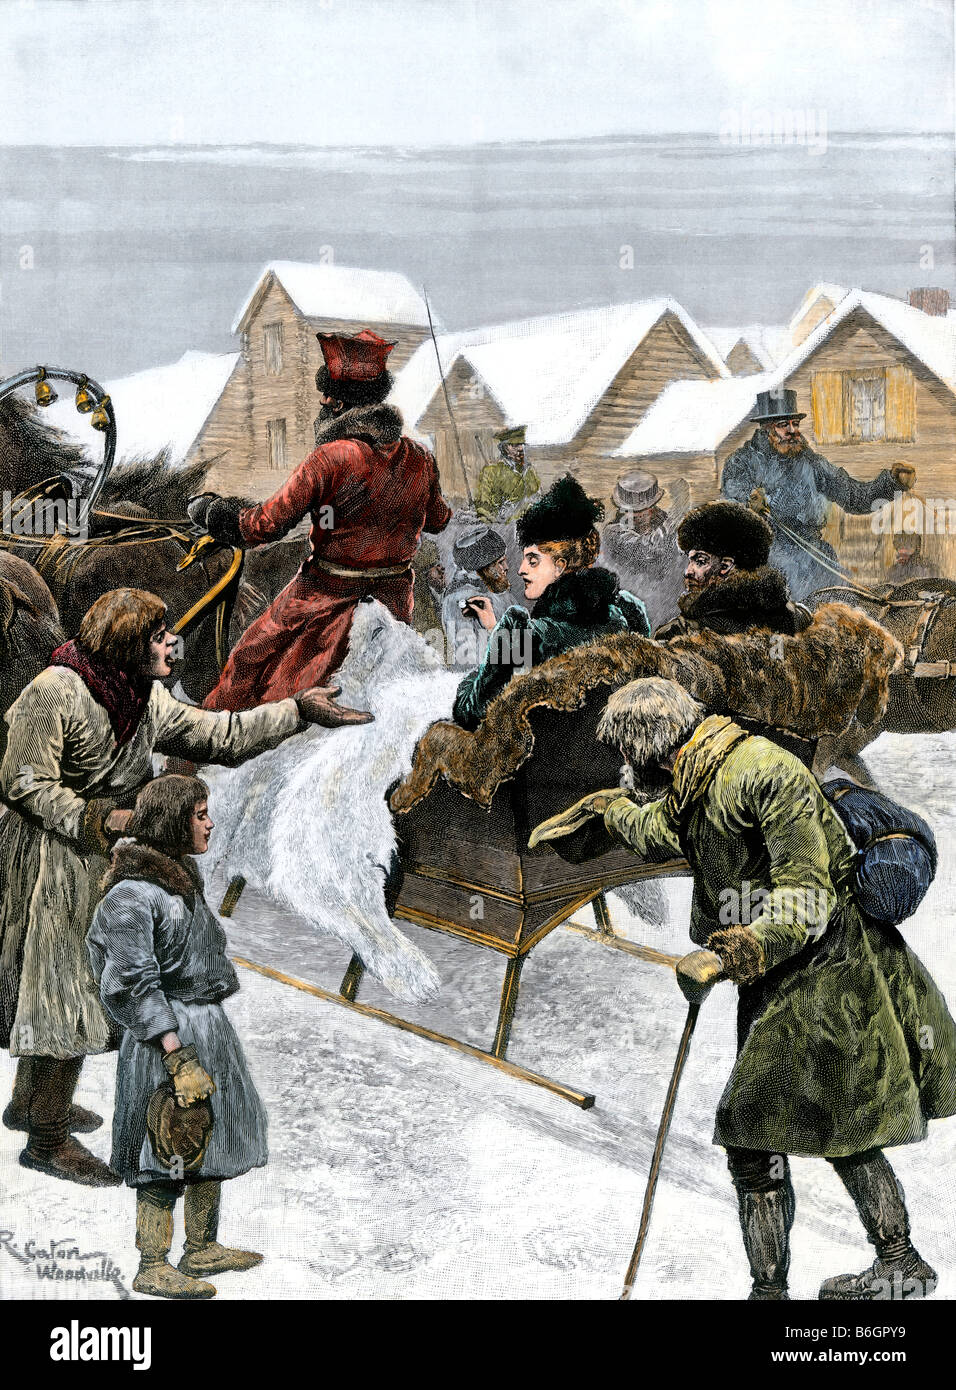 Starving Russian peasants begging from a wealthy couple in the town of Kazan near St. Petersburg 1890s. Hand-colored halftone of an illustration Stock Photo